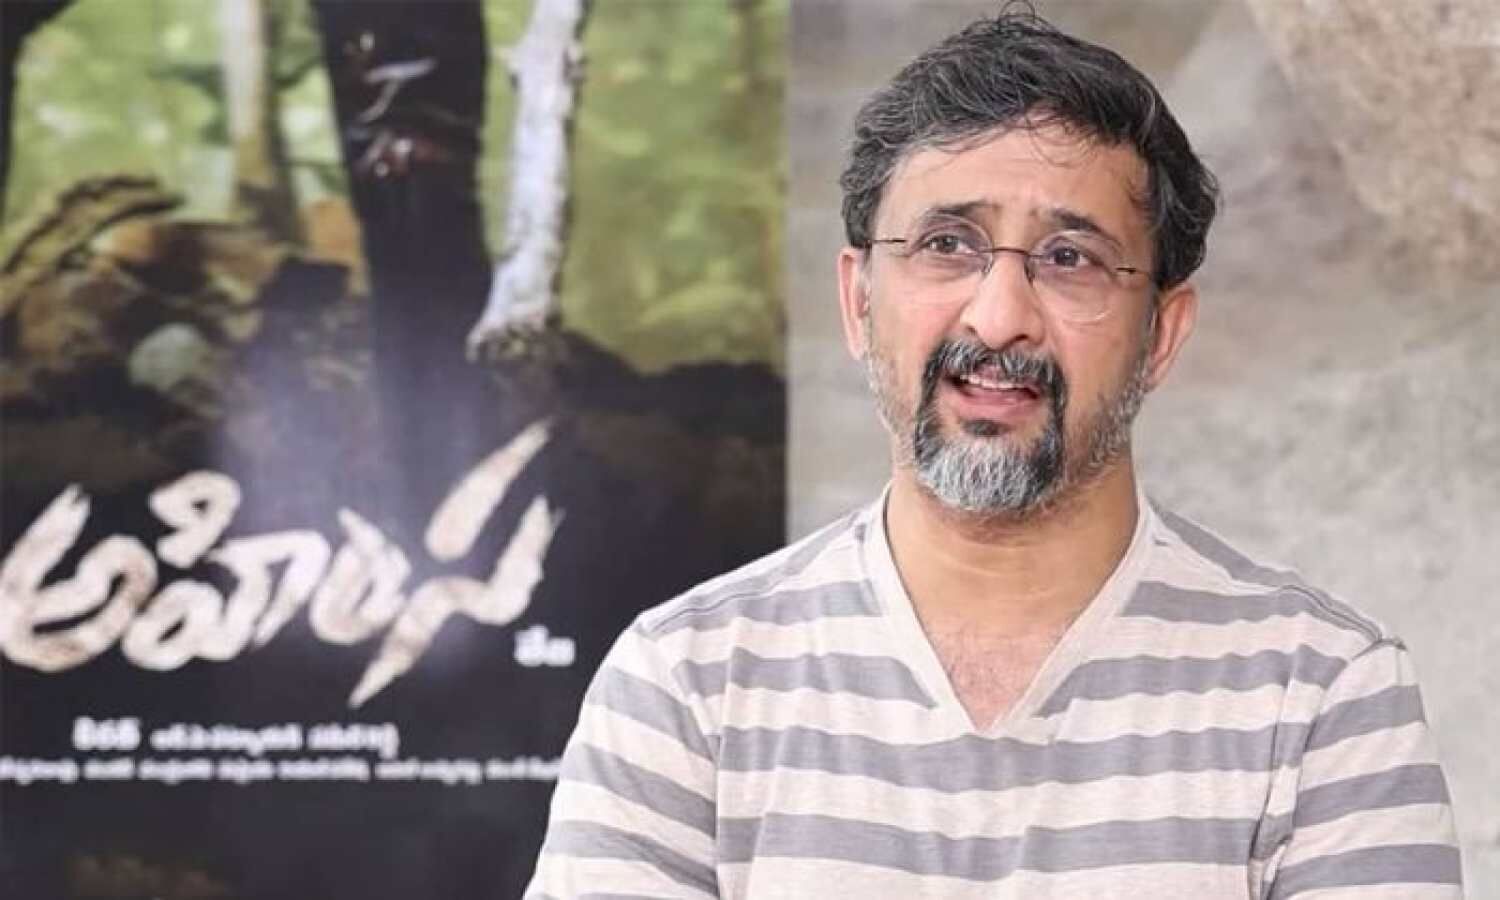 Harish's reaction to director Teja's comments on Ustad Bhagat Singh